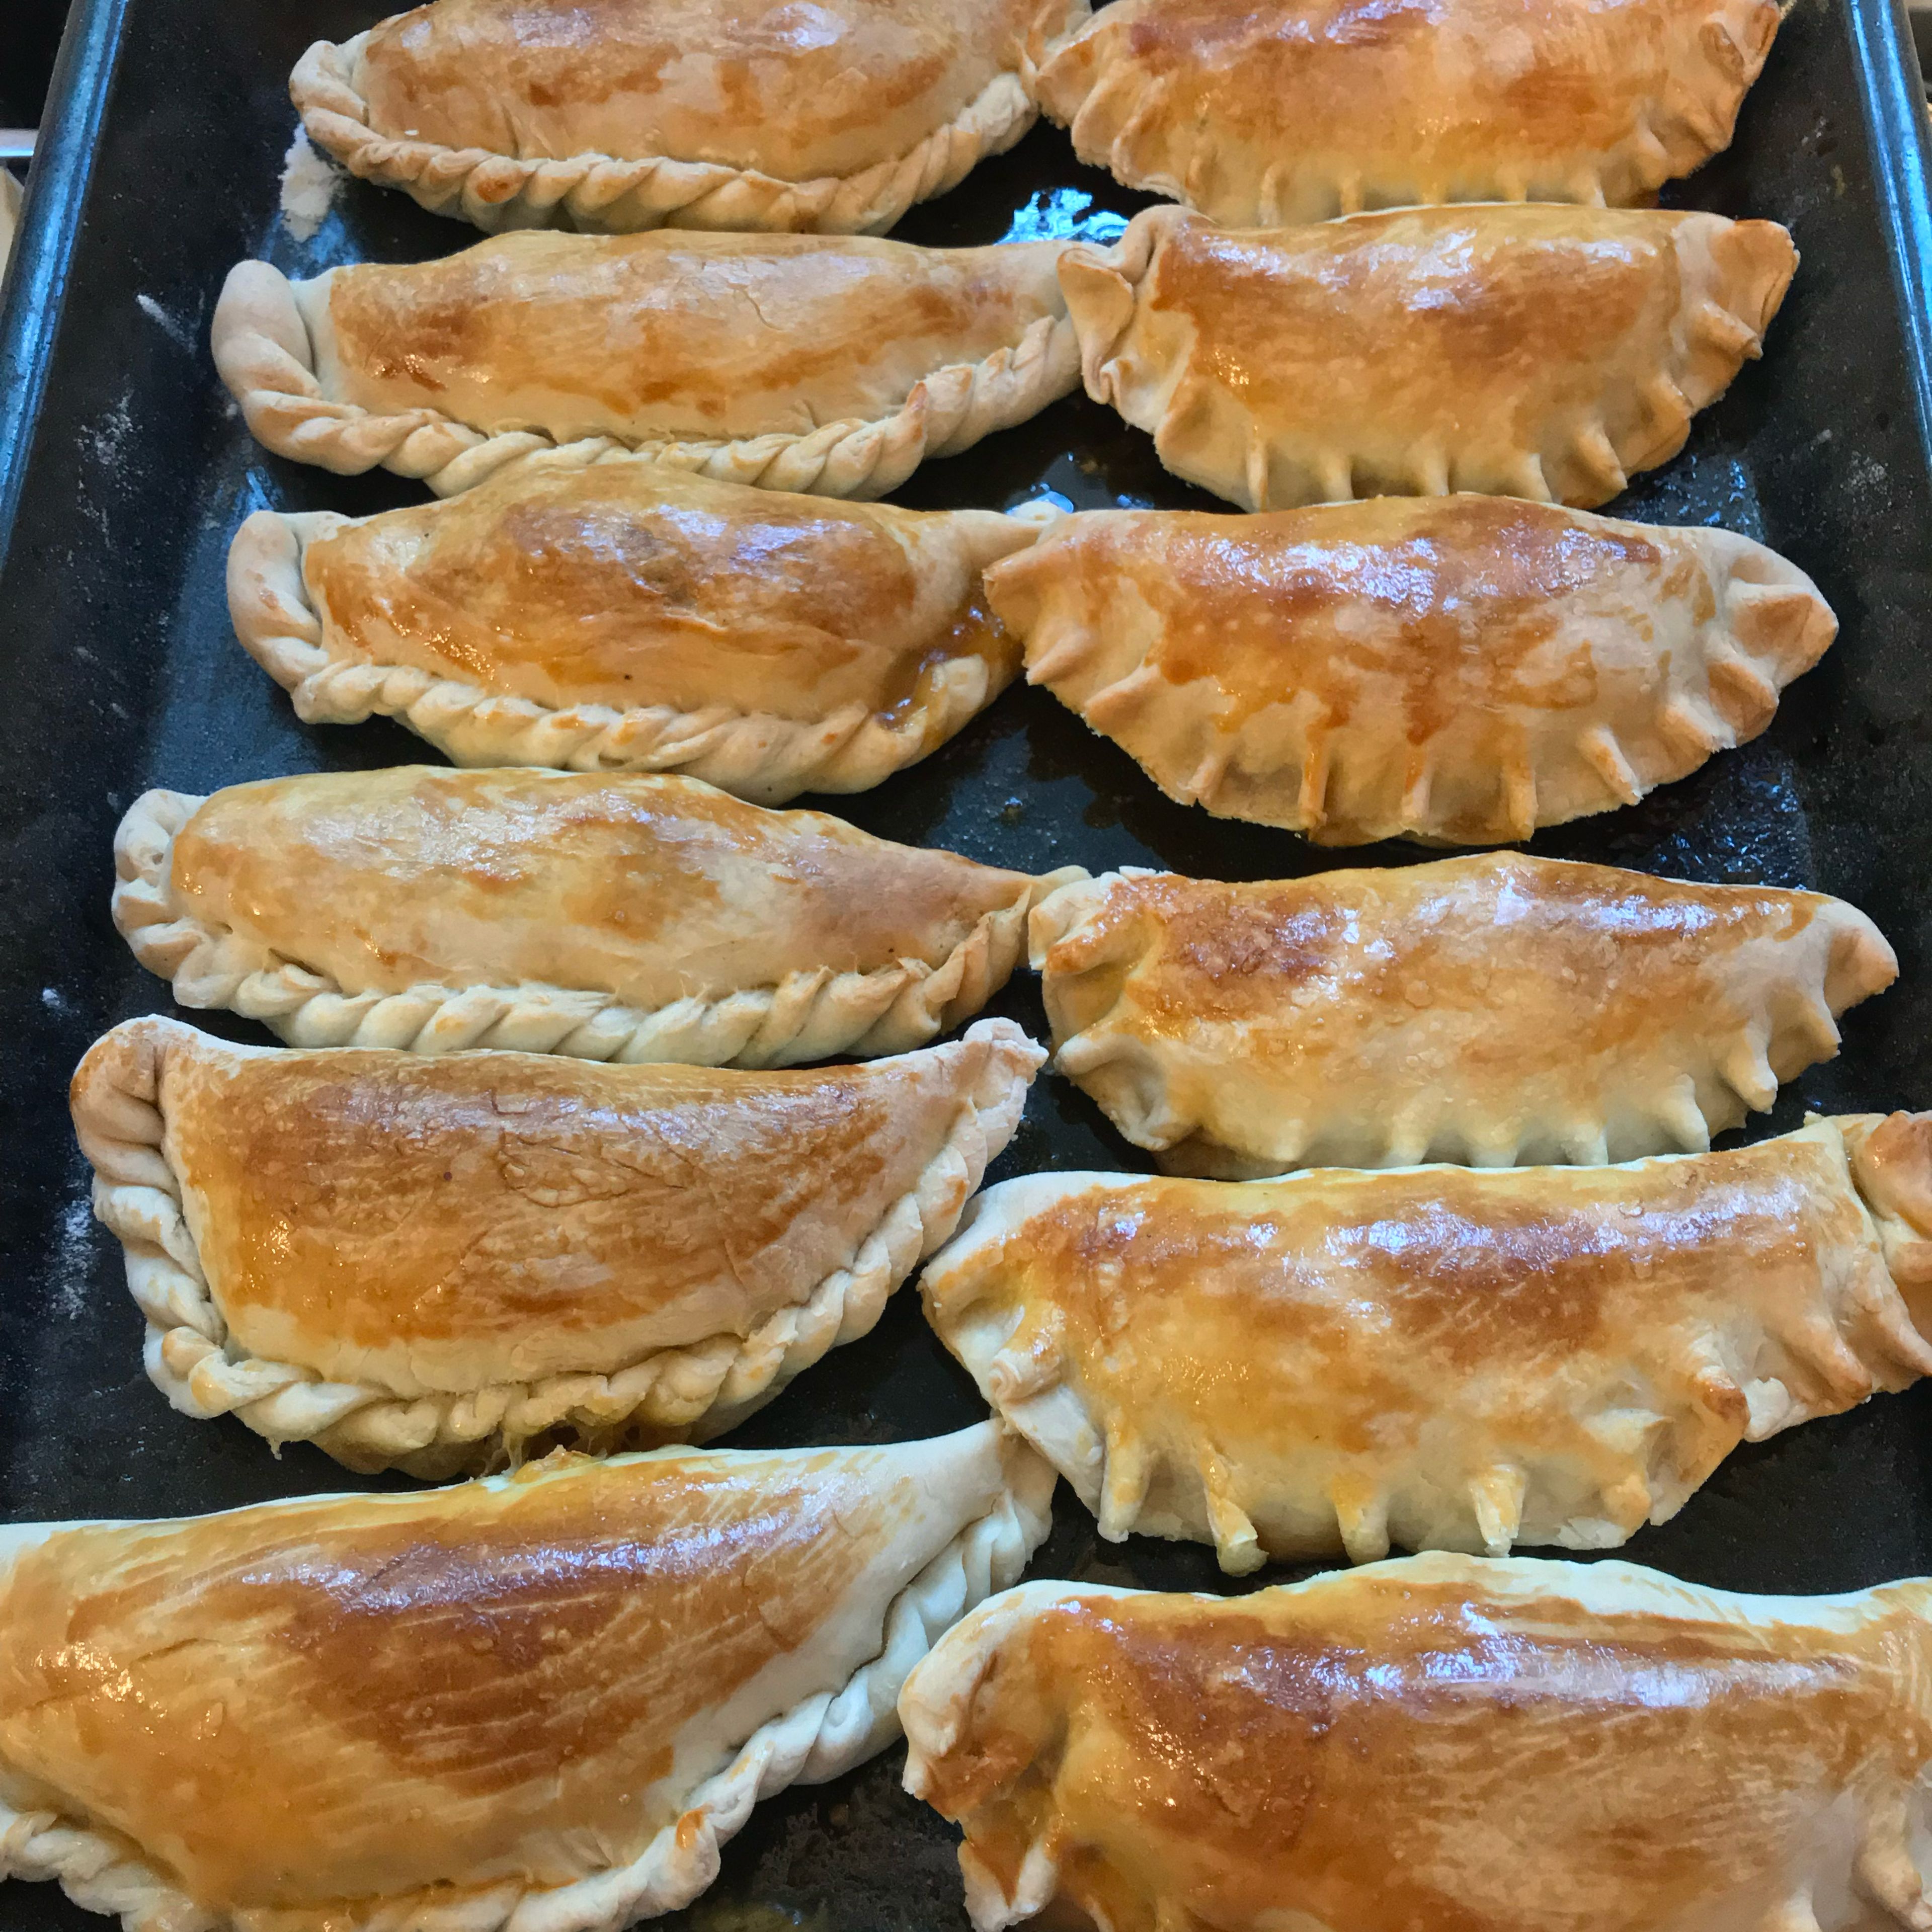 Baked Empanadas: Remove the chilled empanadas from the fridge and paint with egg. Bake in oven at 400 degrees for 20 to 25 minutes or until the empanadas are a light golden brown.